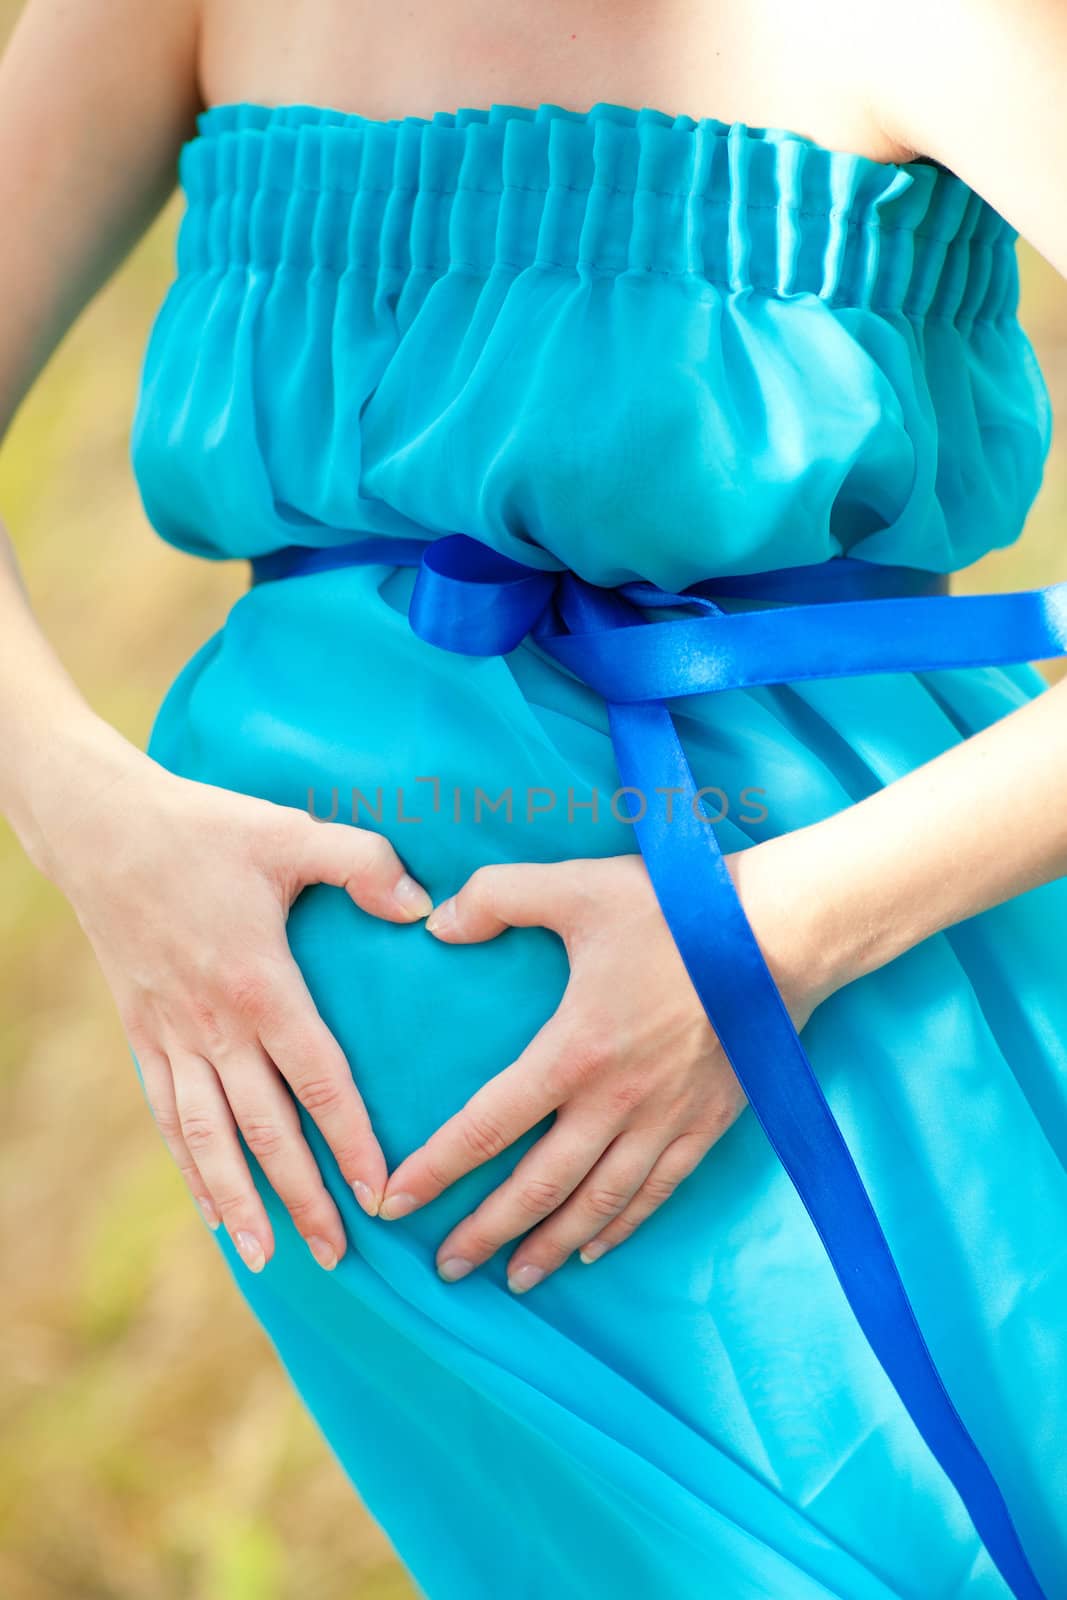 heart on the pregnant belly by vsurkov